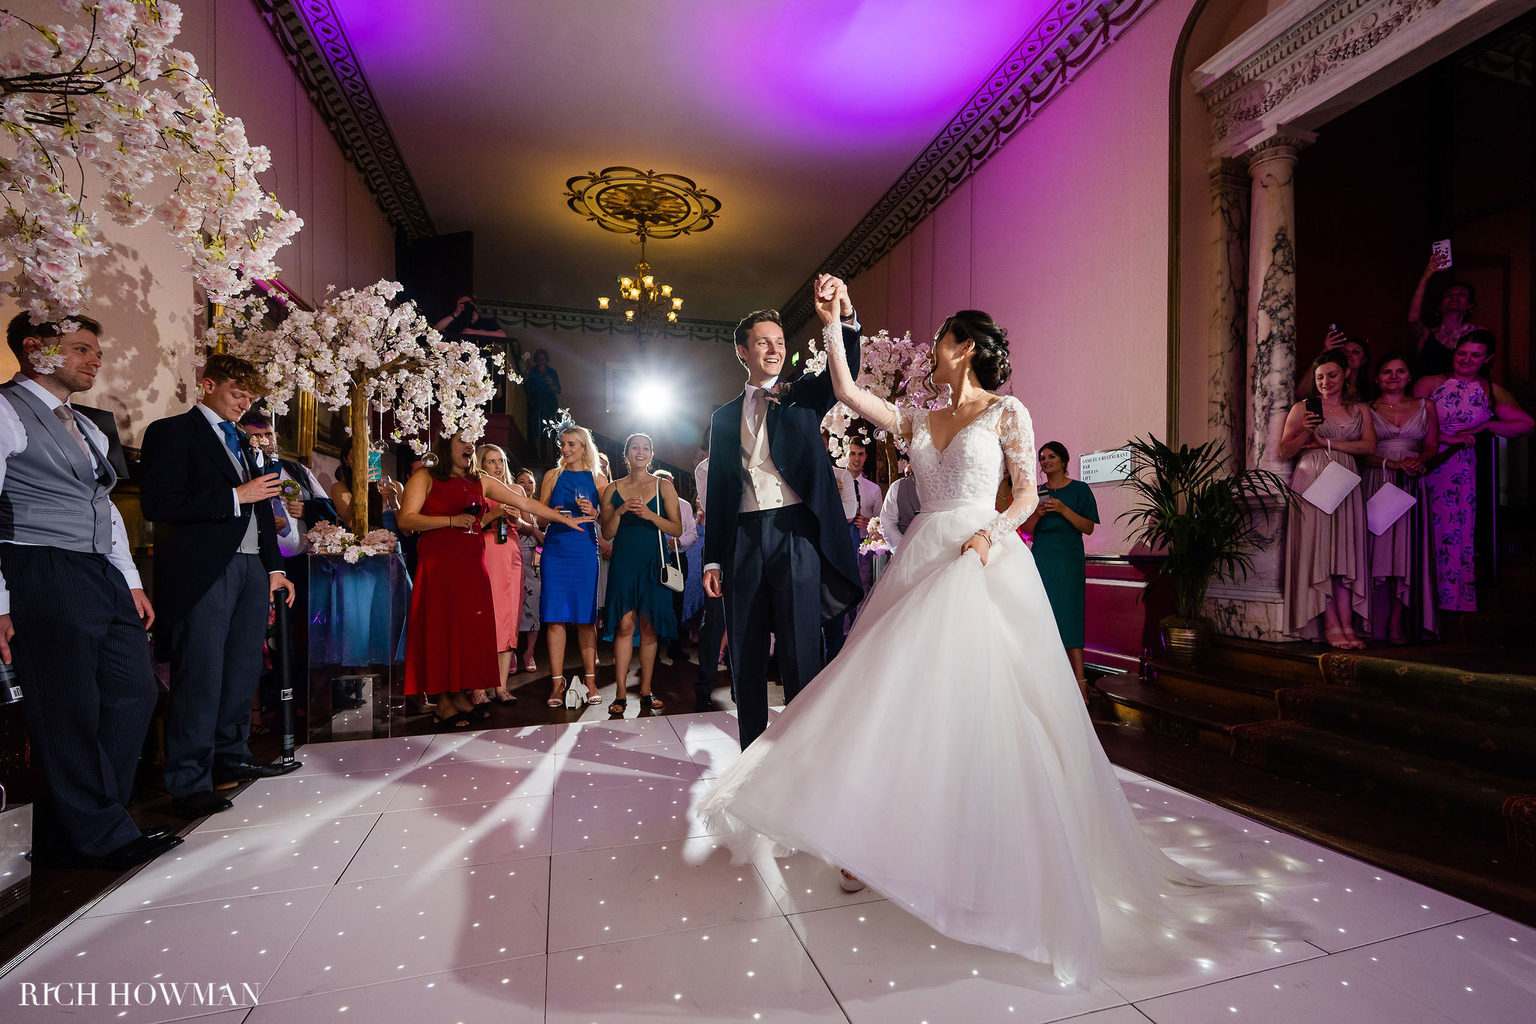 Bridge and groom's first dance during a luxurious wedding reception at Swinton Park castle hotel in North Yorkshire. Photo by Rich Howman.